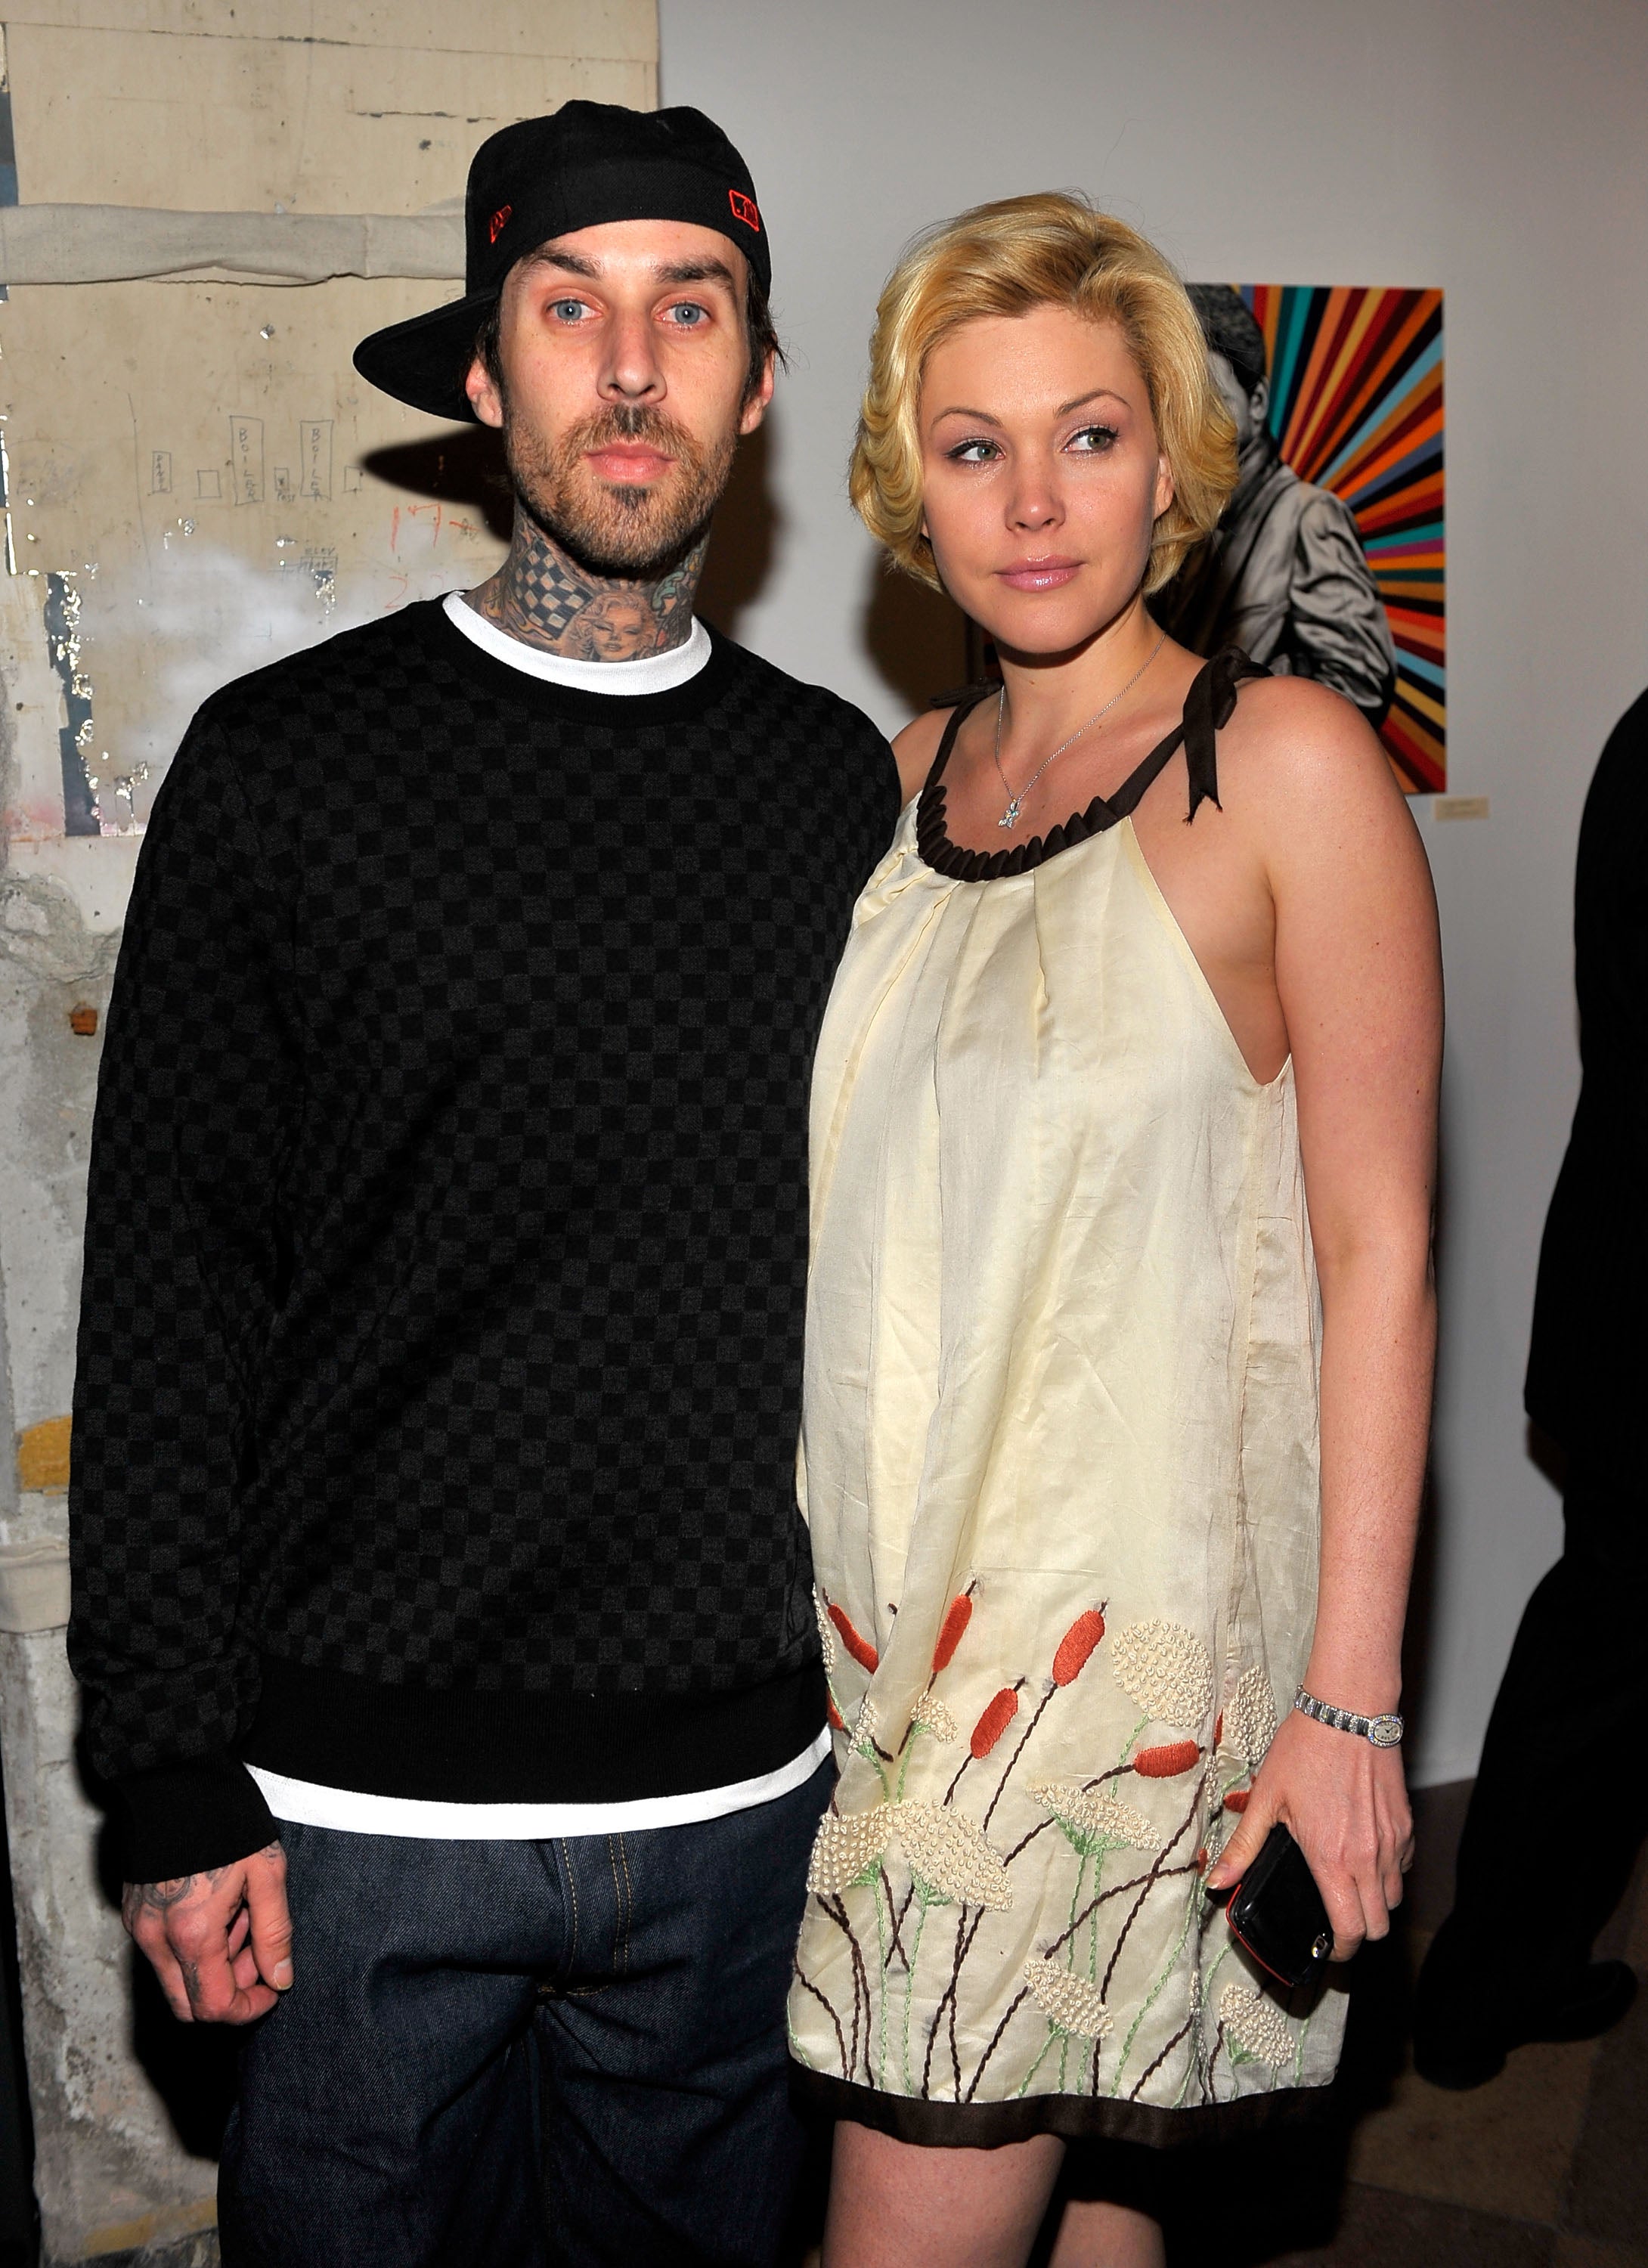 Travis Barker and Shanna Moakler attend the launch of Worlds on Fire: Grammy-Nominated Artist Exhibition at Pacific Electric Lofts on February 2, 2009